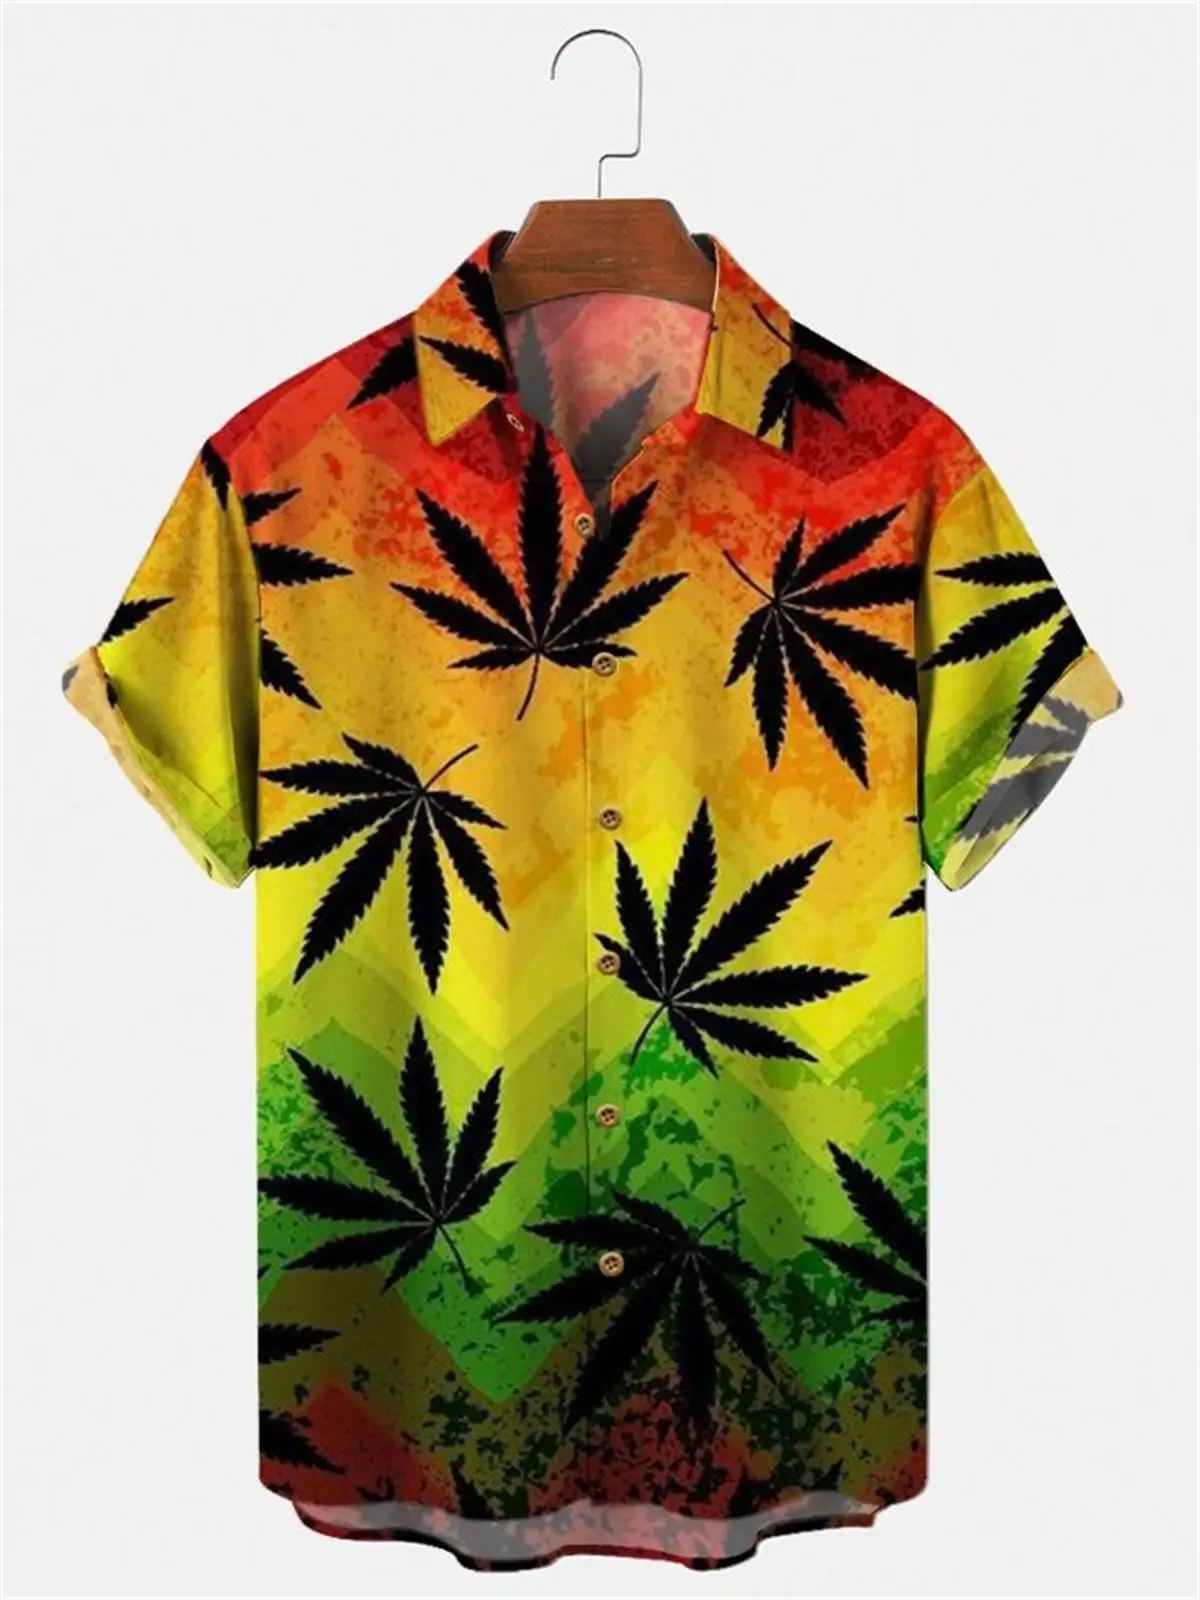 Hawaiian Shirts for Men and Women, Coconut Print Shirts for Men, Casual, Short Sleeves, Lapel, Single Breasted, Large 5XL